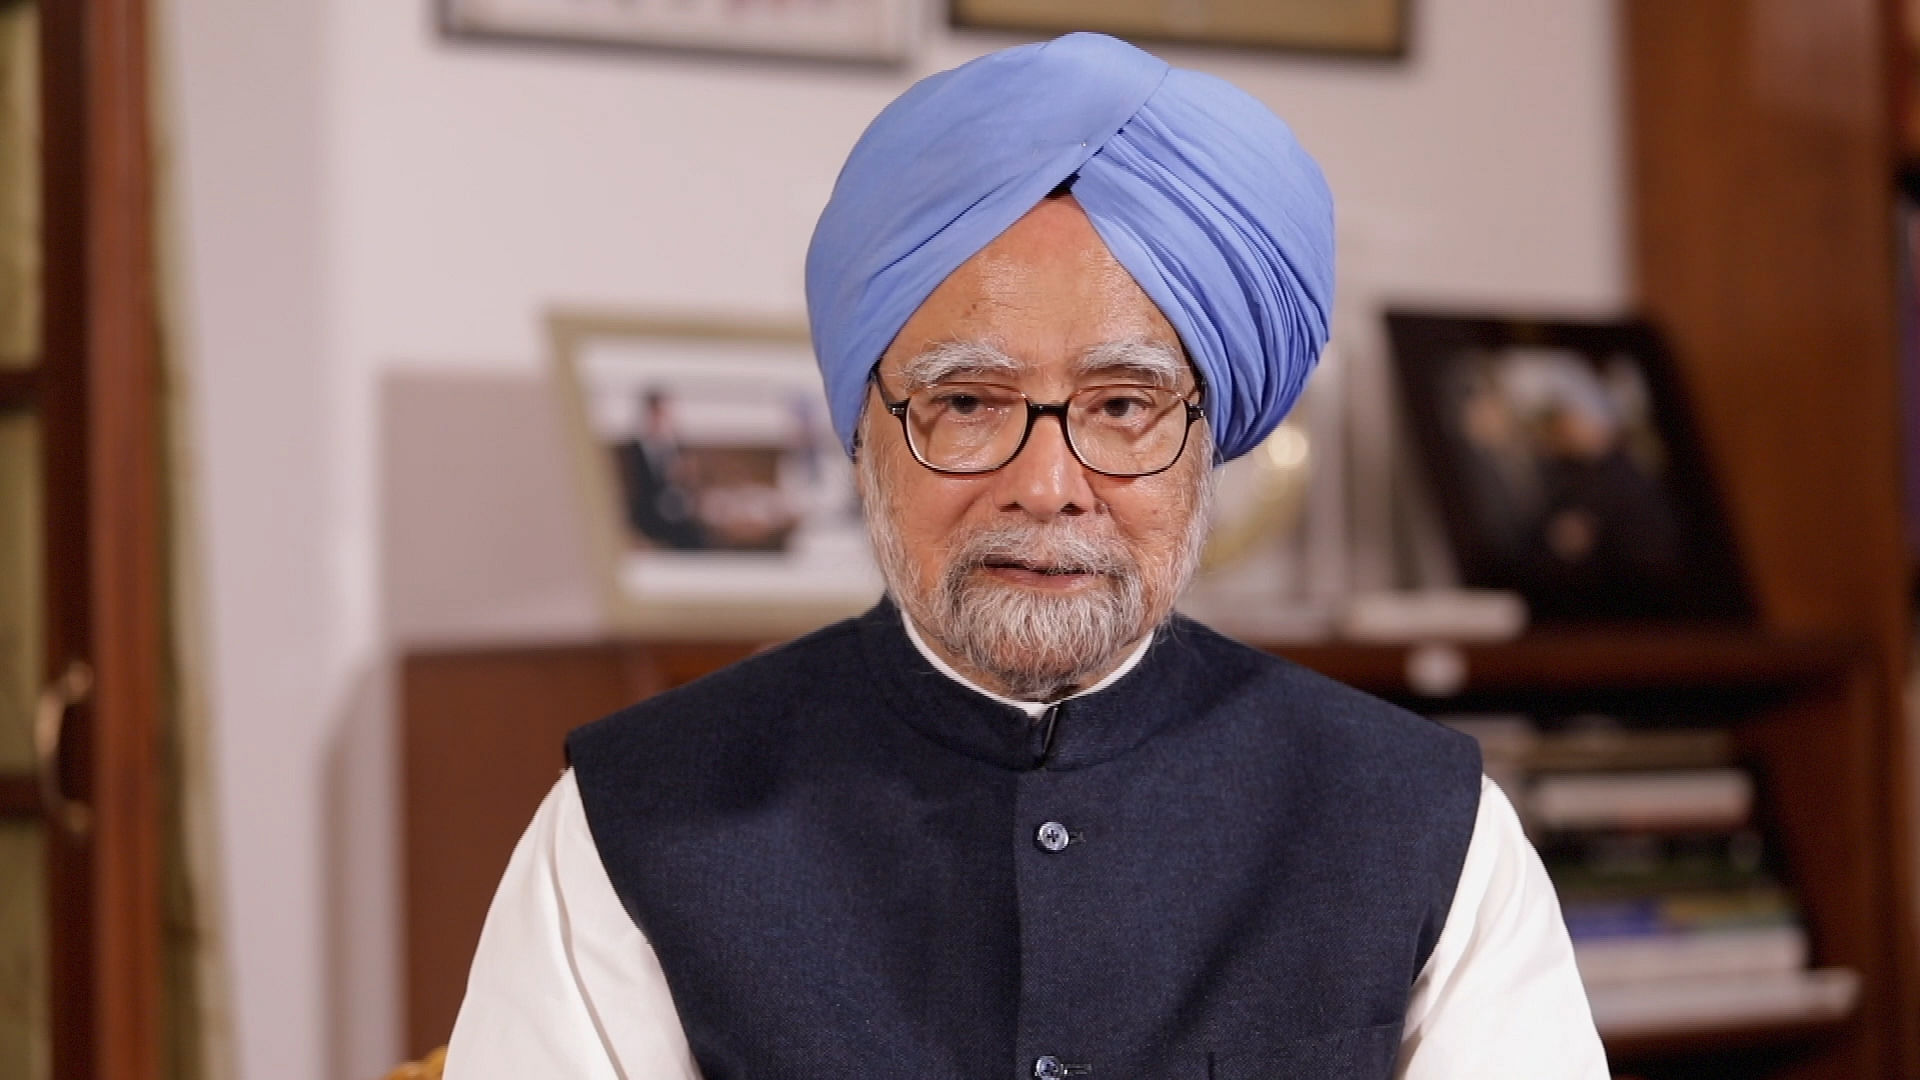 Manmohan Singh said Narendra Modi was setting a “dangerous precedent” with his “insatiable desire to tarnish” every Constitutional office.